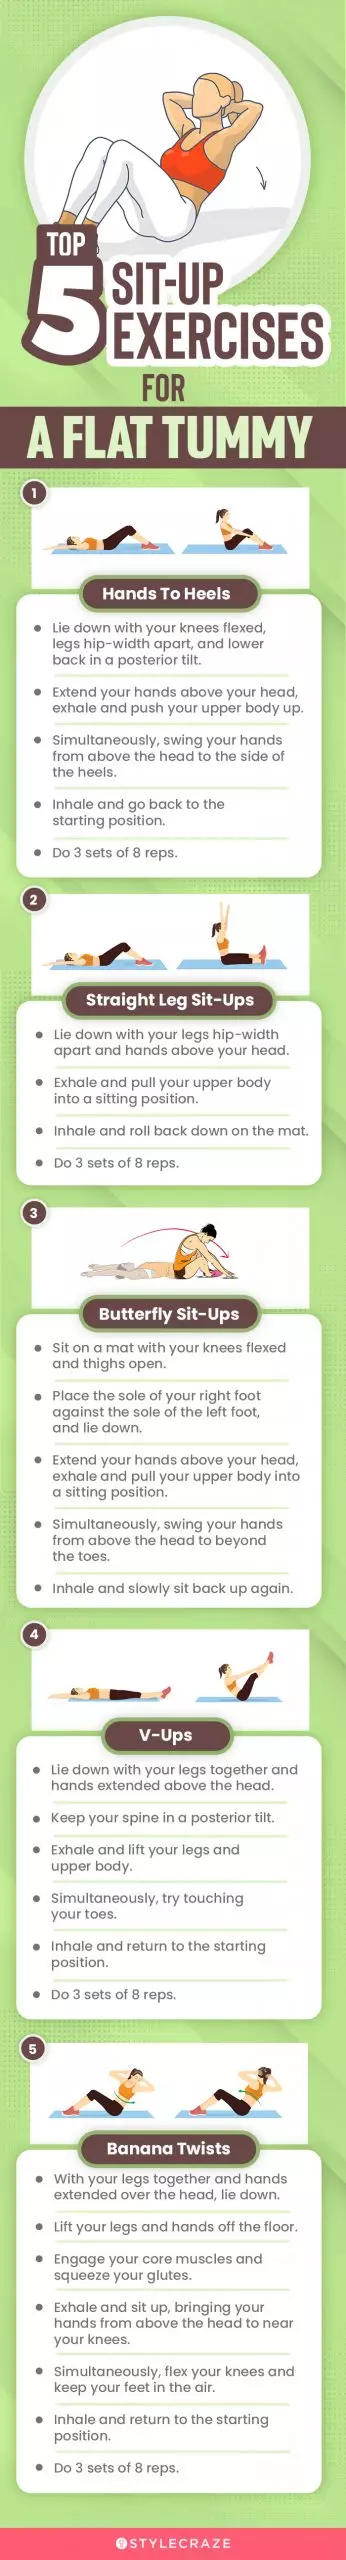 top 5 sit up exercises for a flat tummy (infographic)